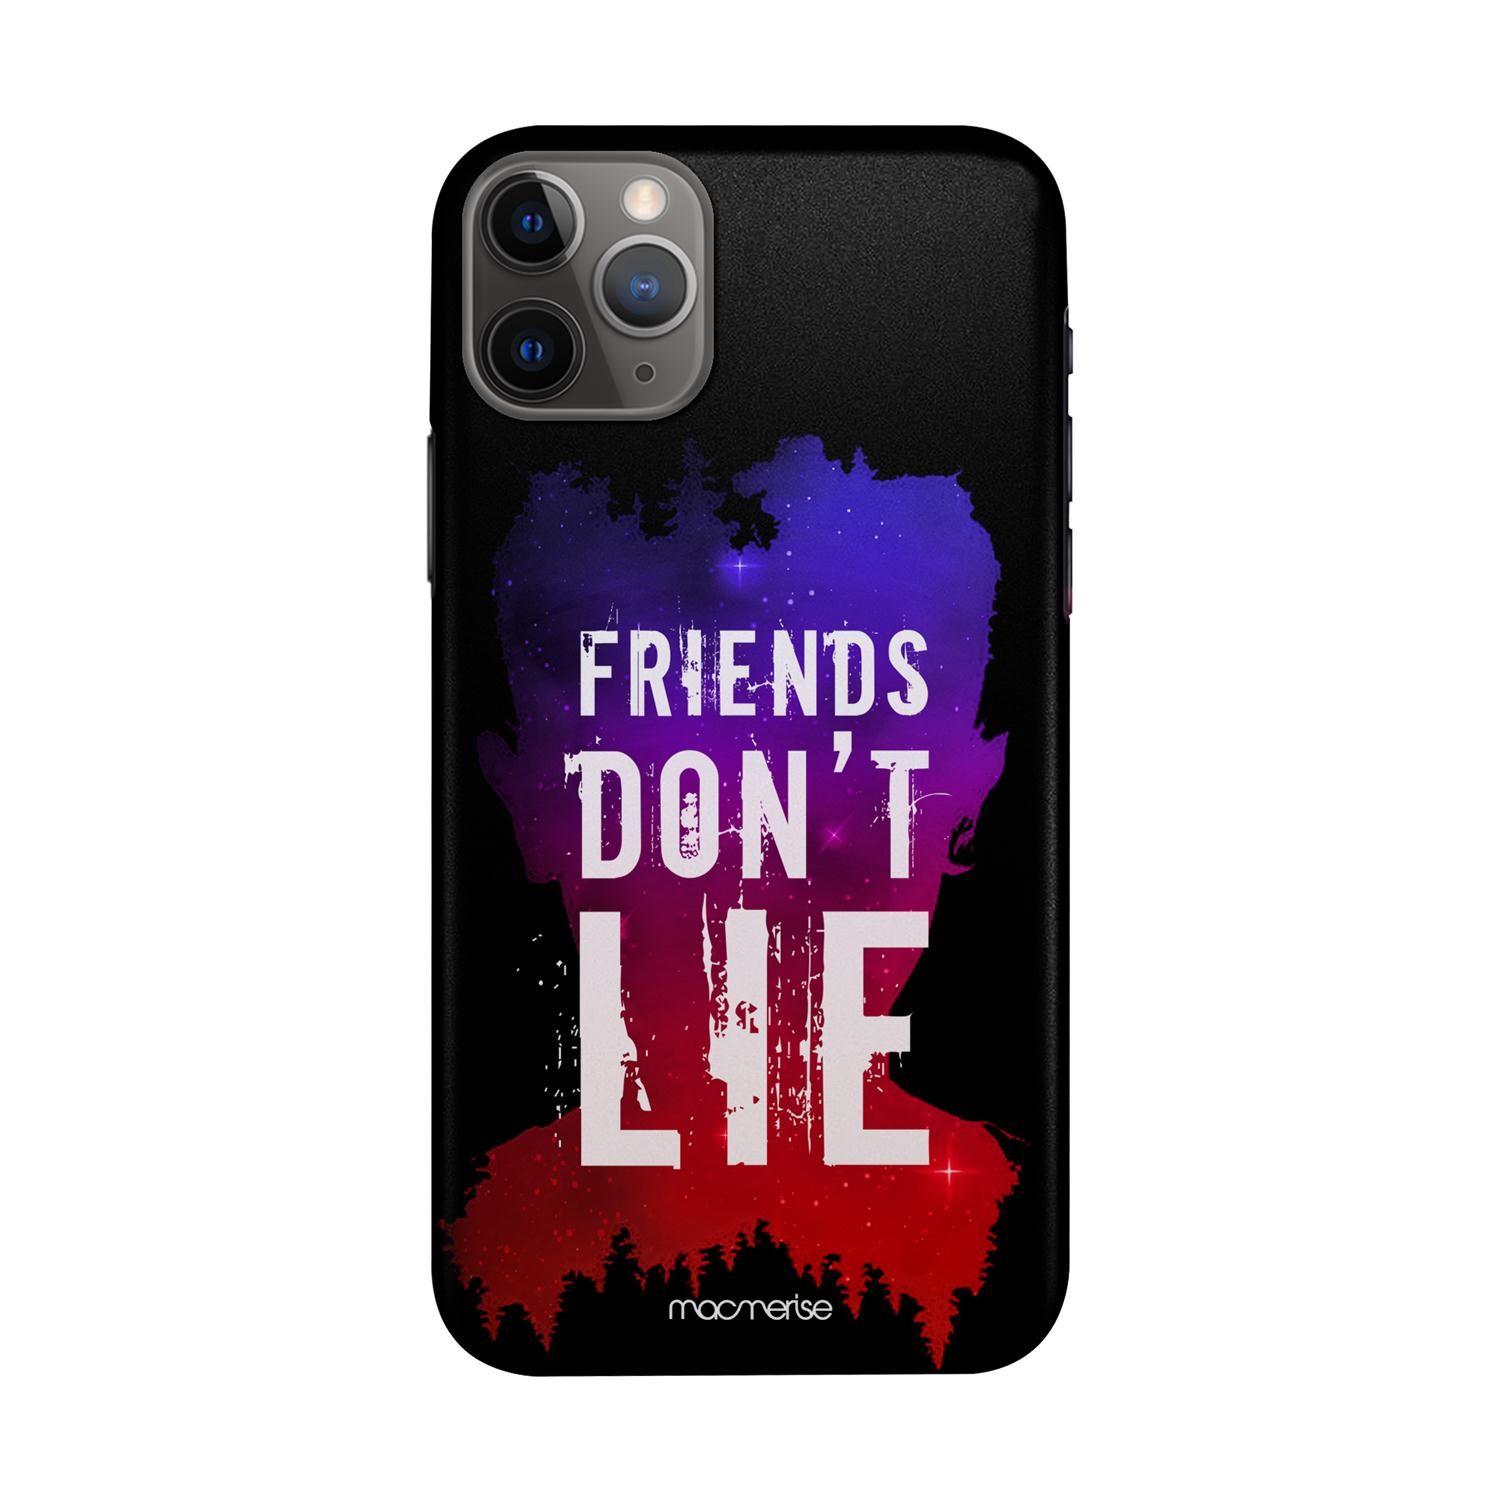 Friends Dont Lie - Sleek Phone Case for iPhone 11 Pro Max